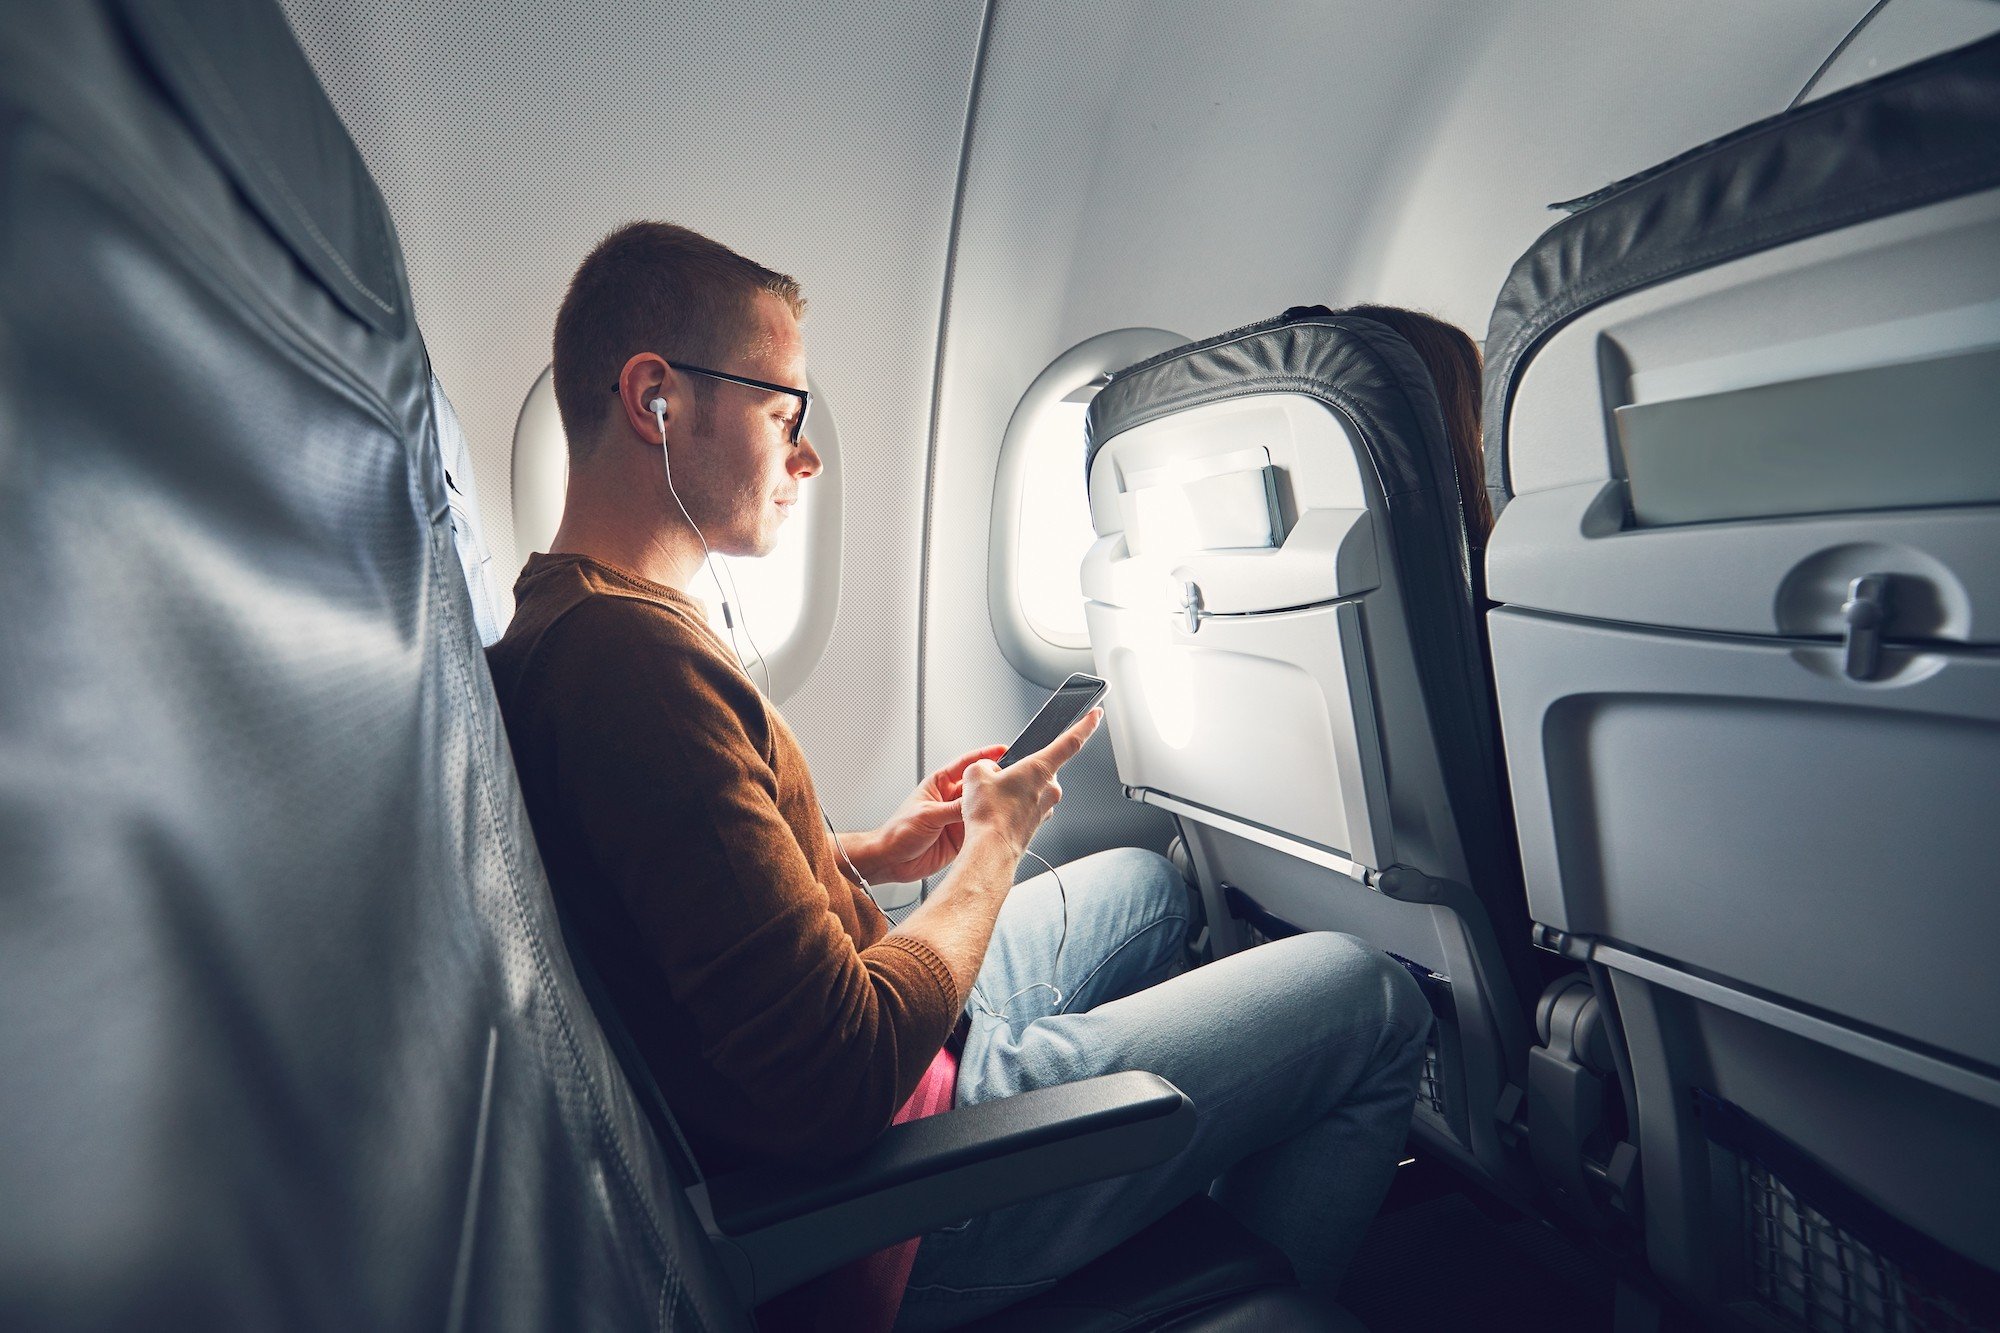 Airplane passenger listens to music on his phone